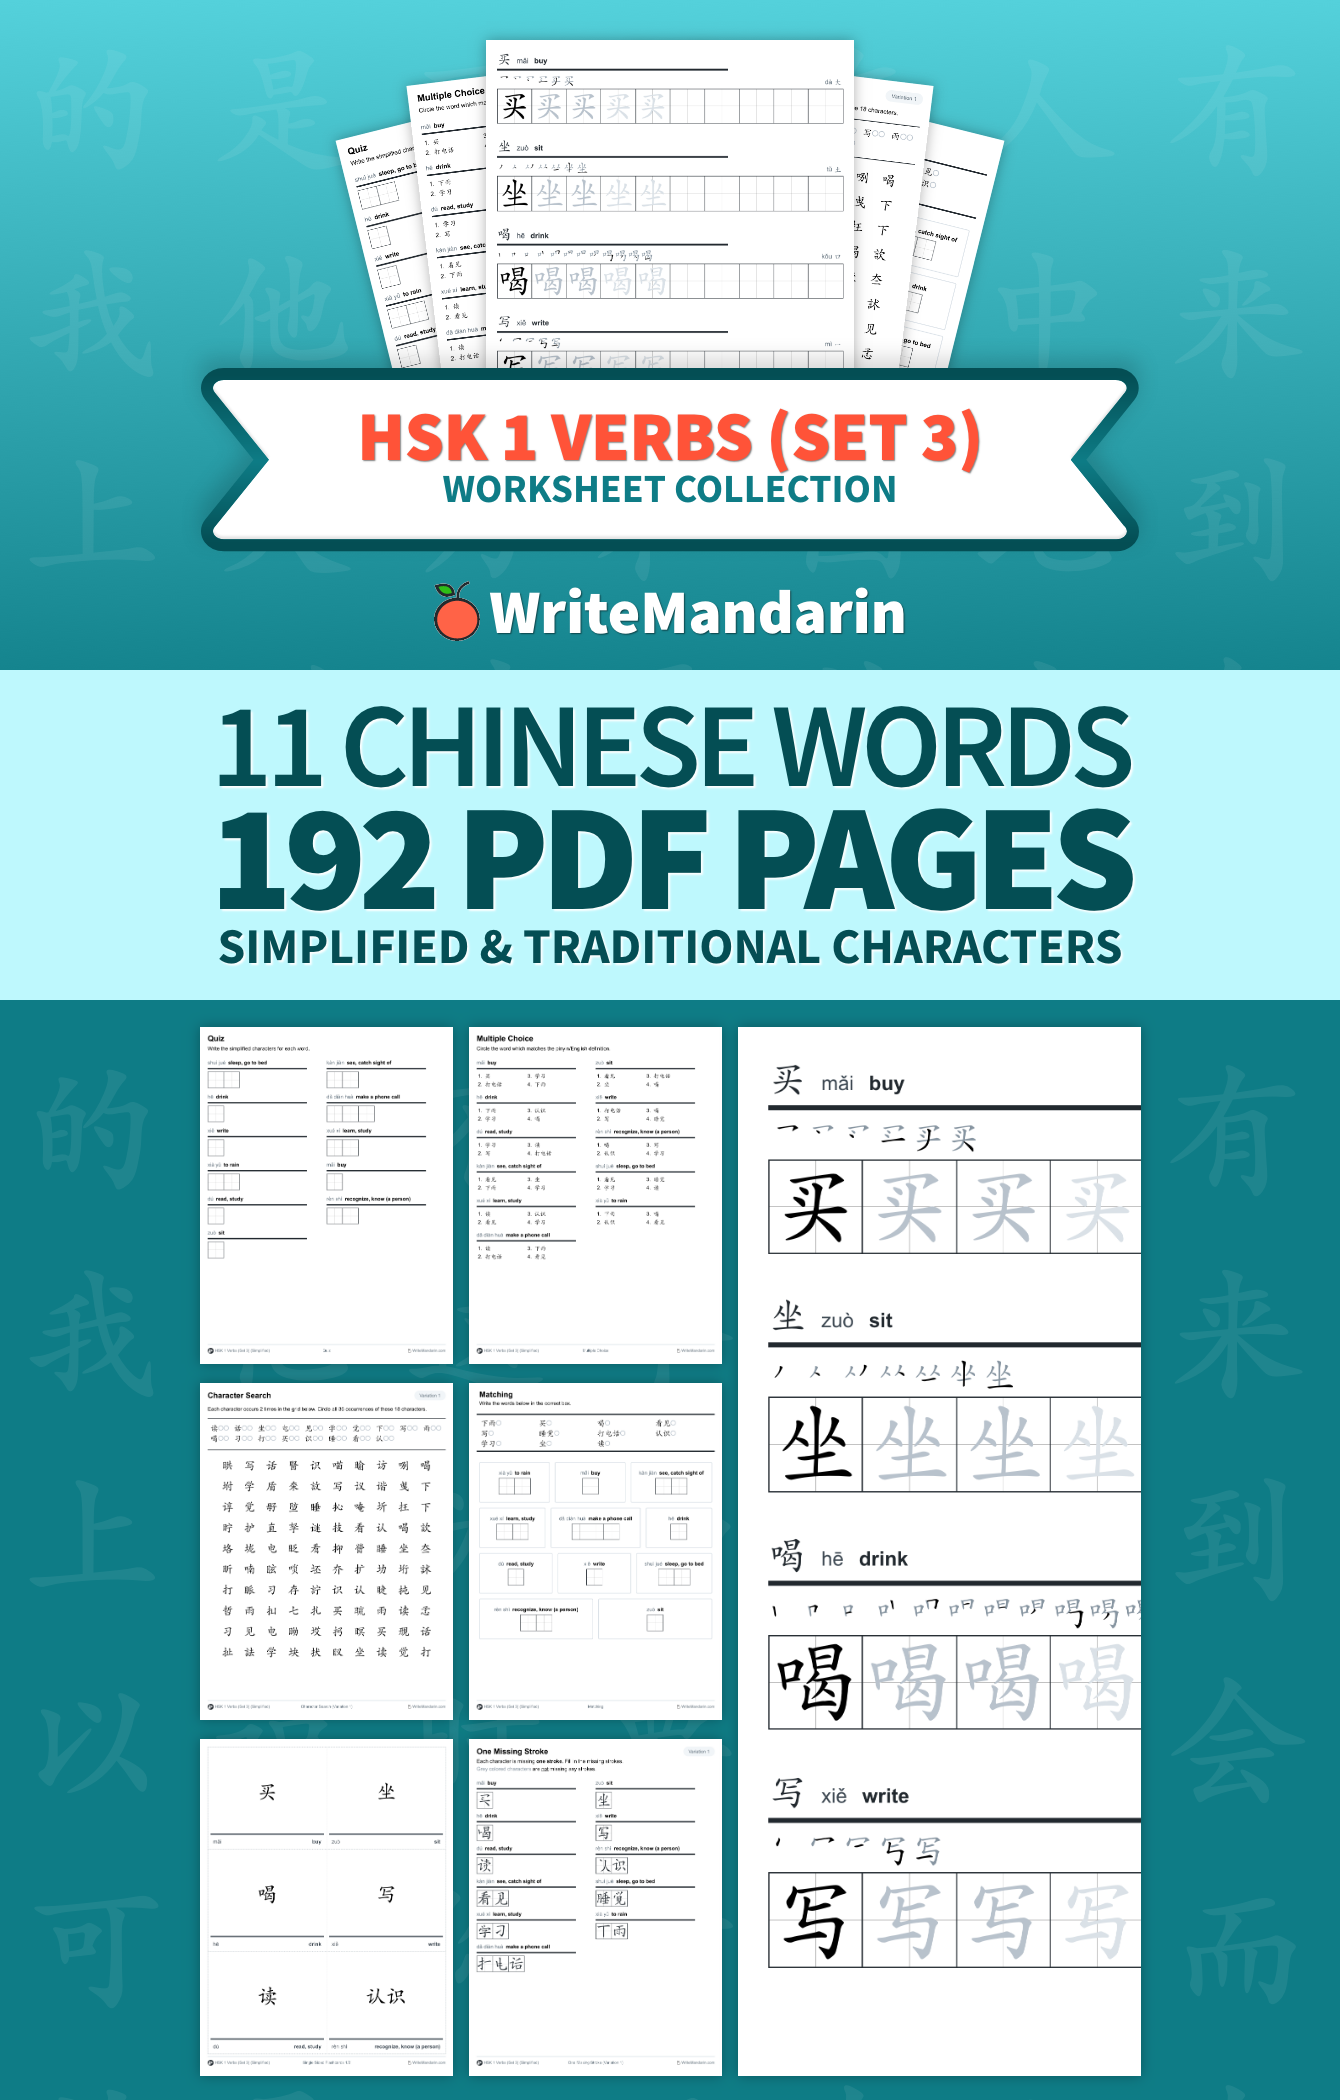 Preview image of HSK 1 Verbs (Set 3) worksheet collection